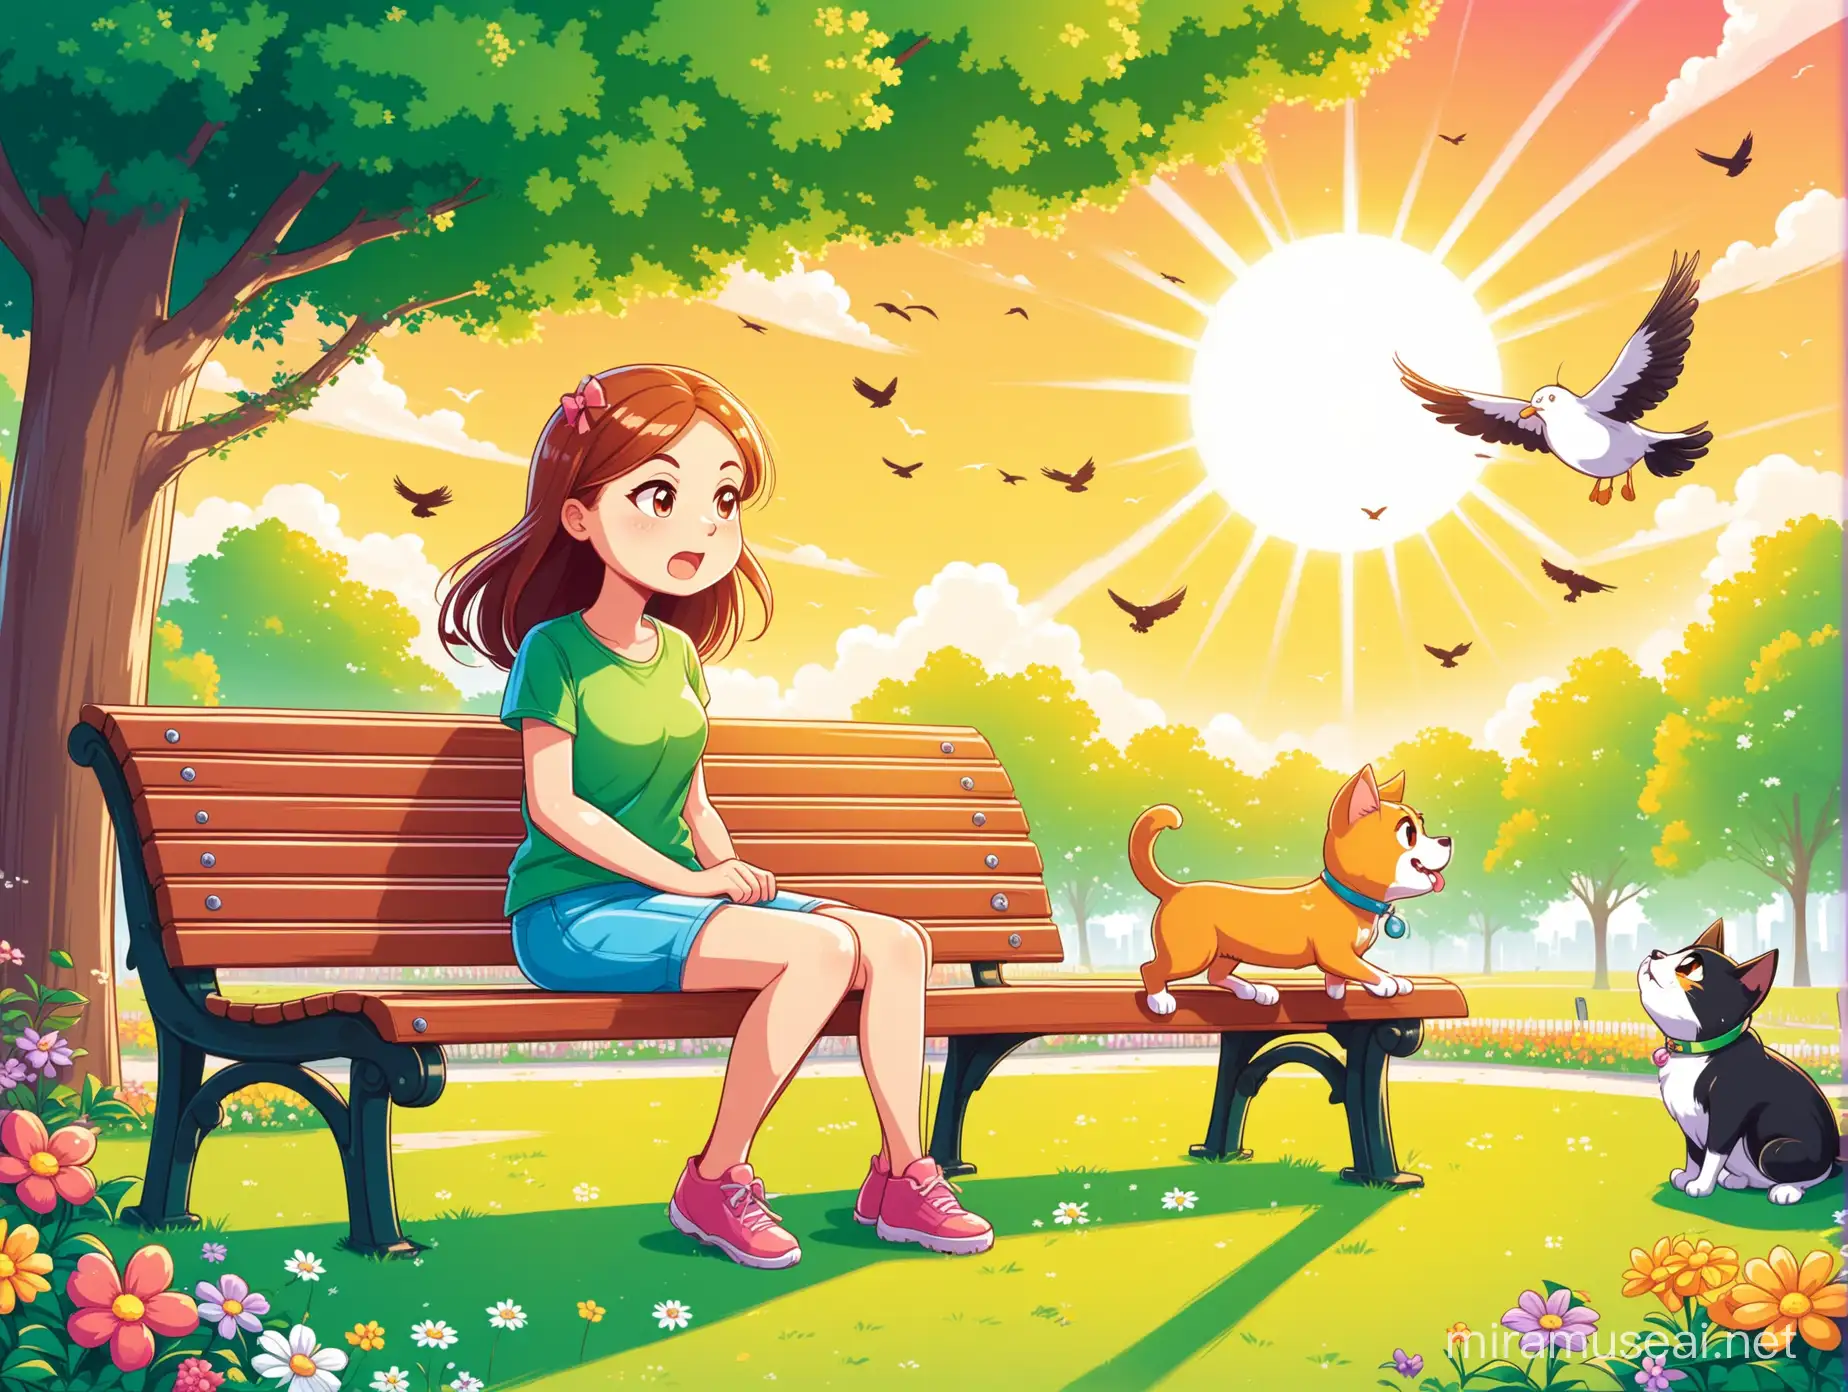 a girl sitting on a bench in a park and her dog is sniffing the bench. Next to the bench two cats are fighting. colorful cartoon style. nice flowers, sun shining, birds flying